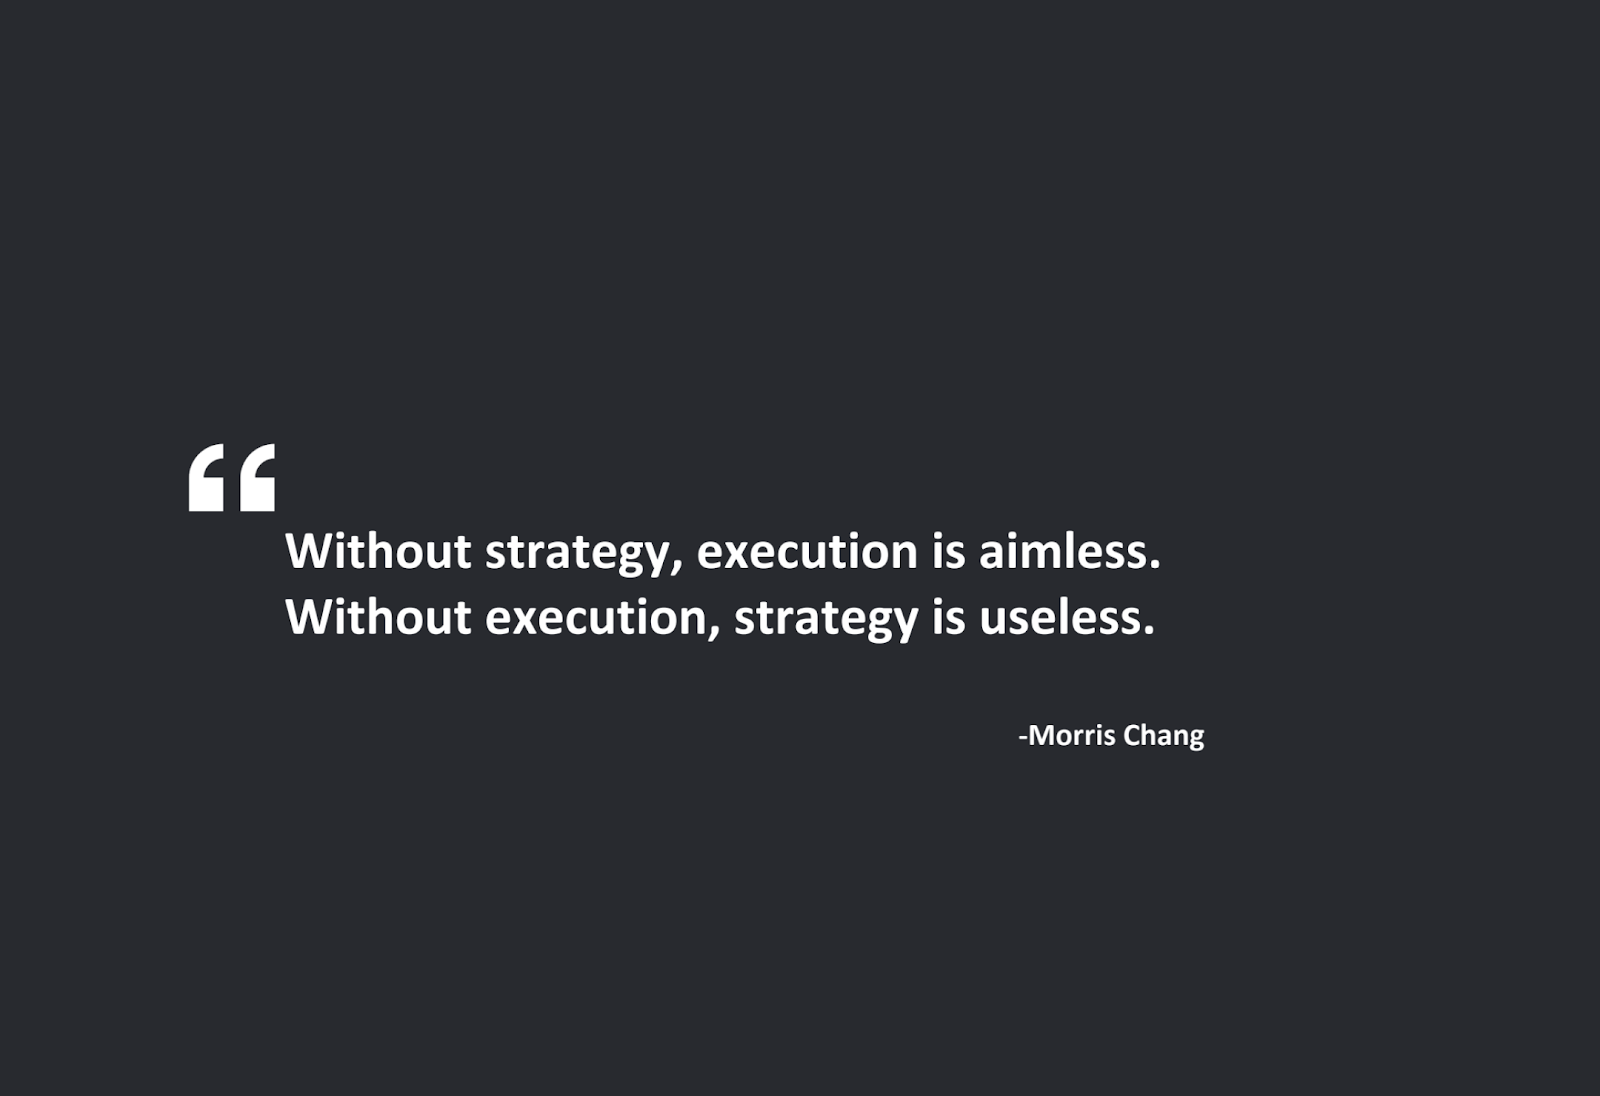 Every product marketing team needs to have a strategy in place to succeed.